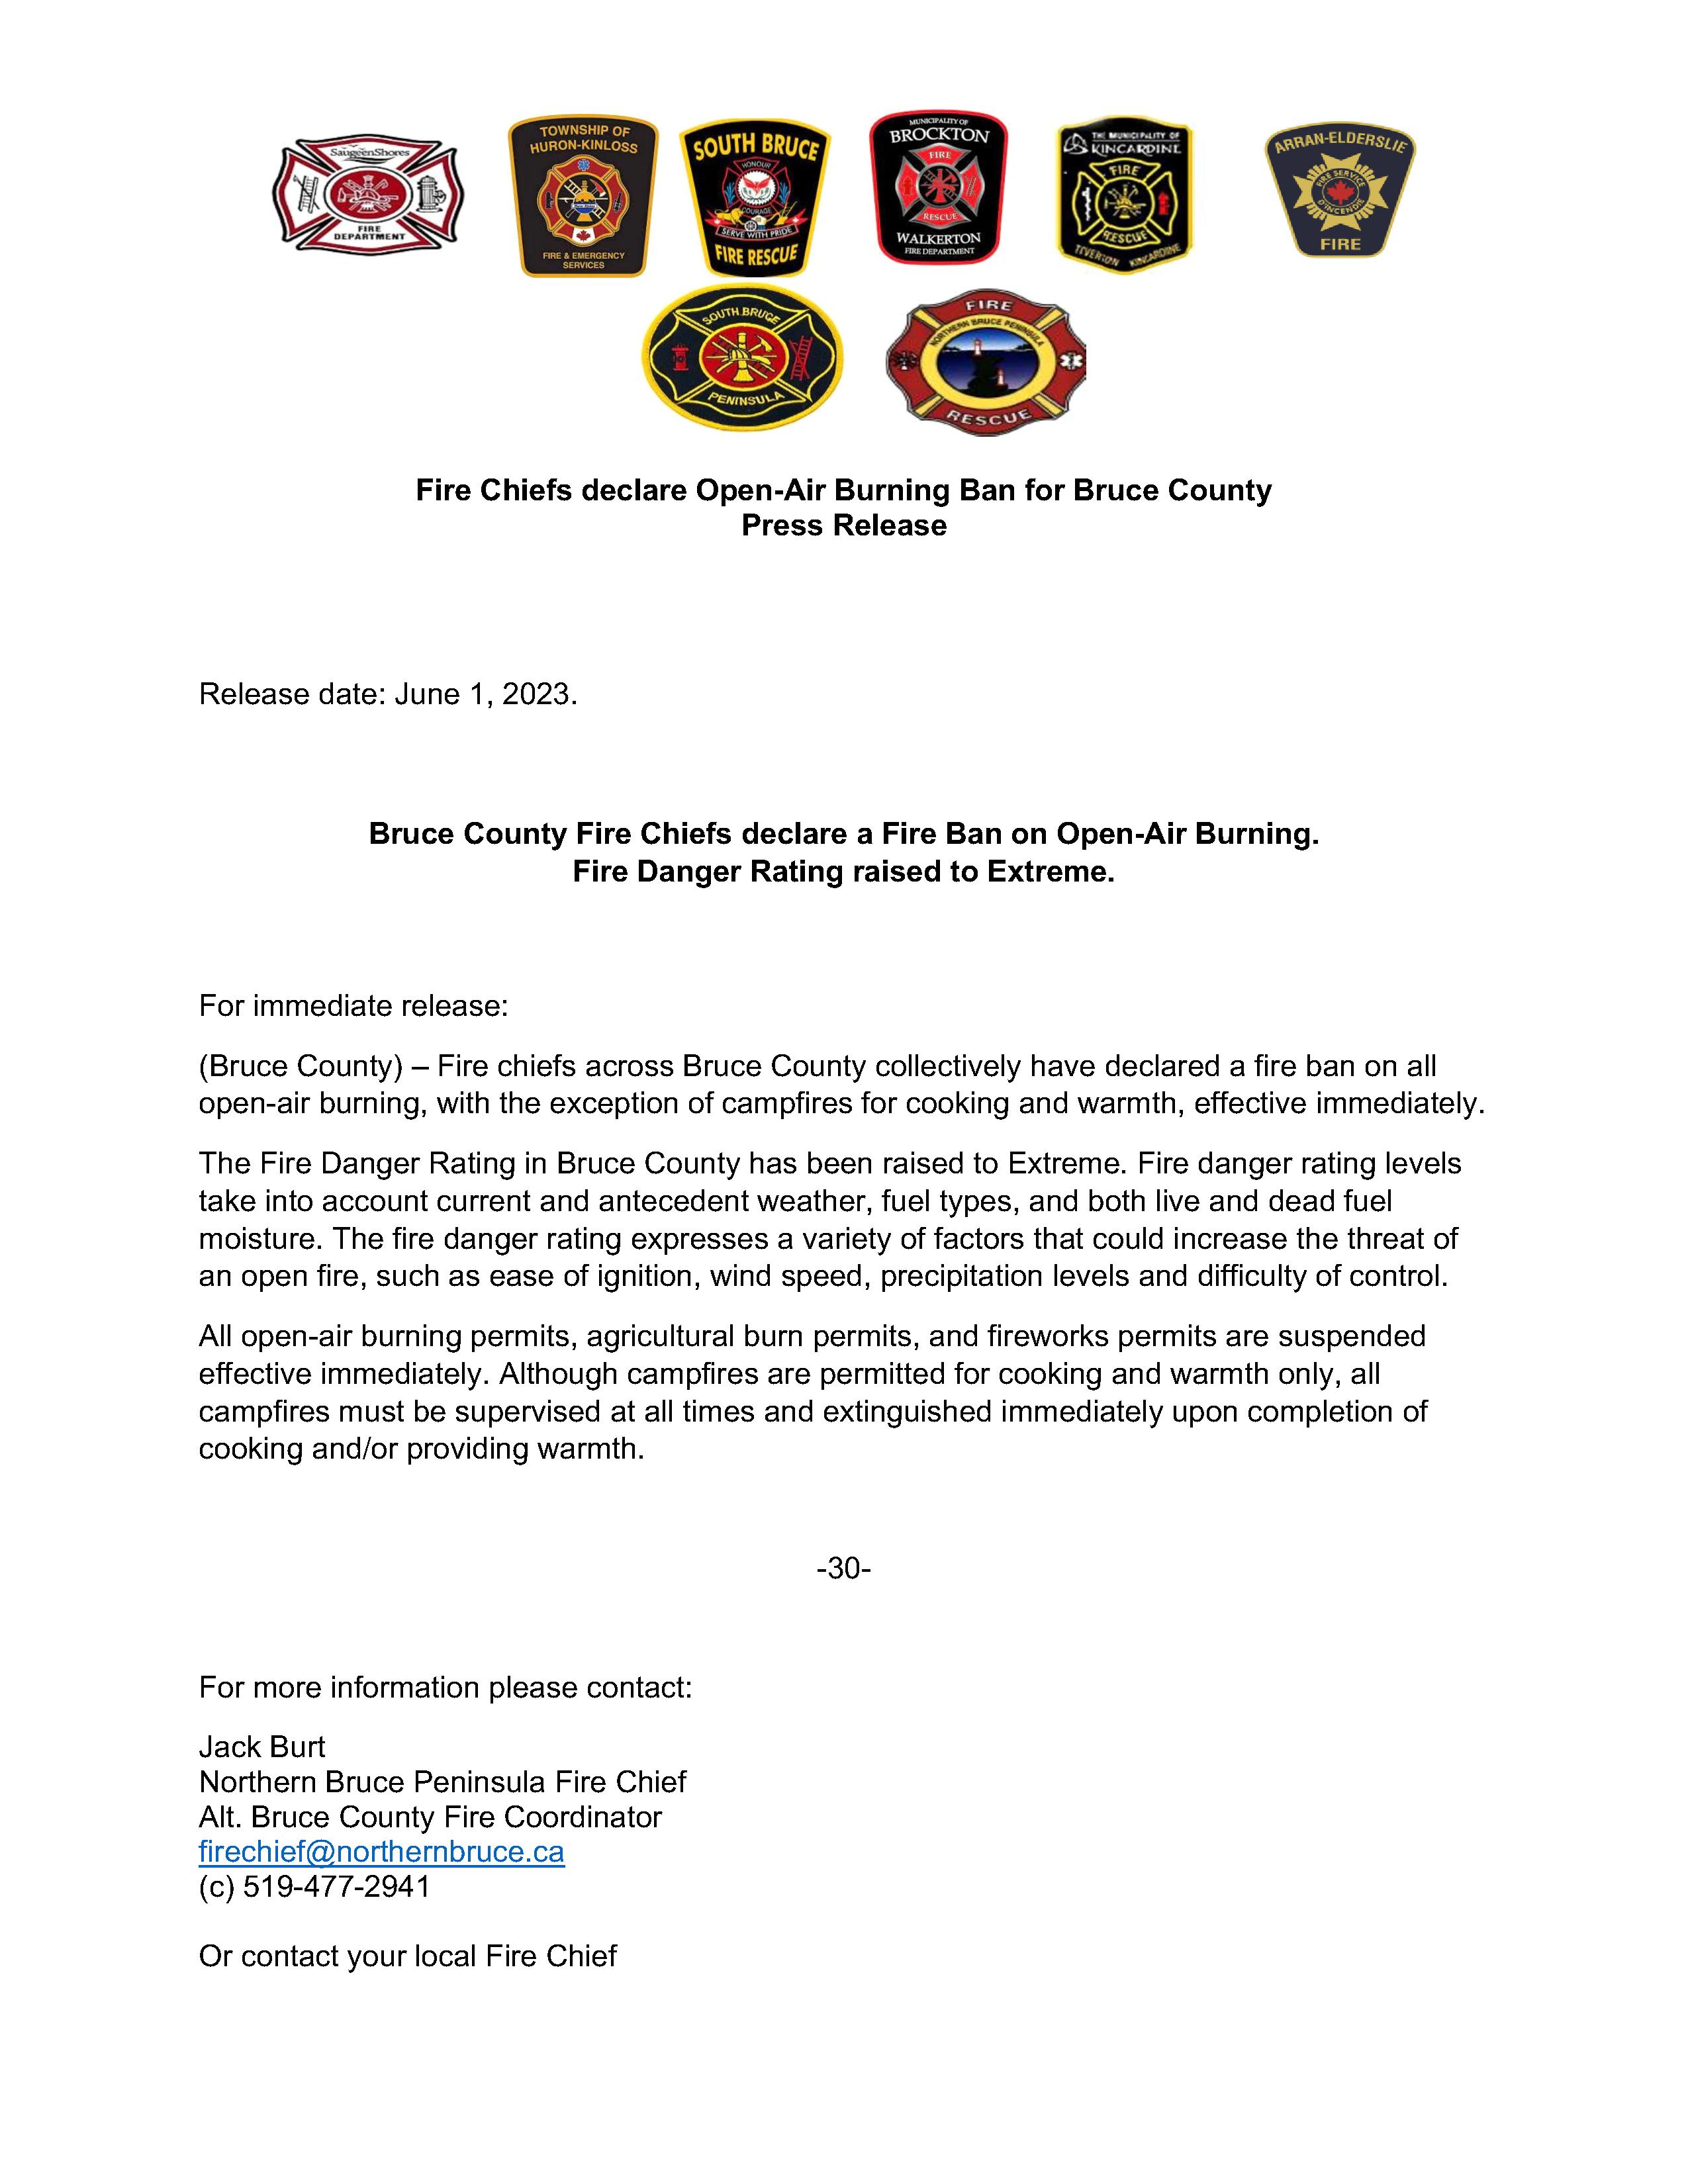 Bruce County Fire ban Press Release 